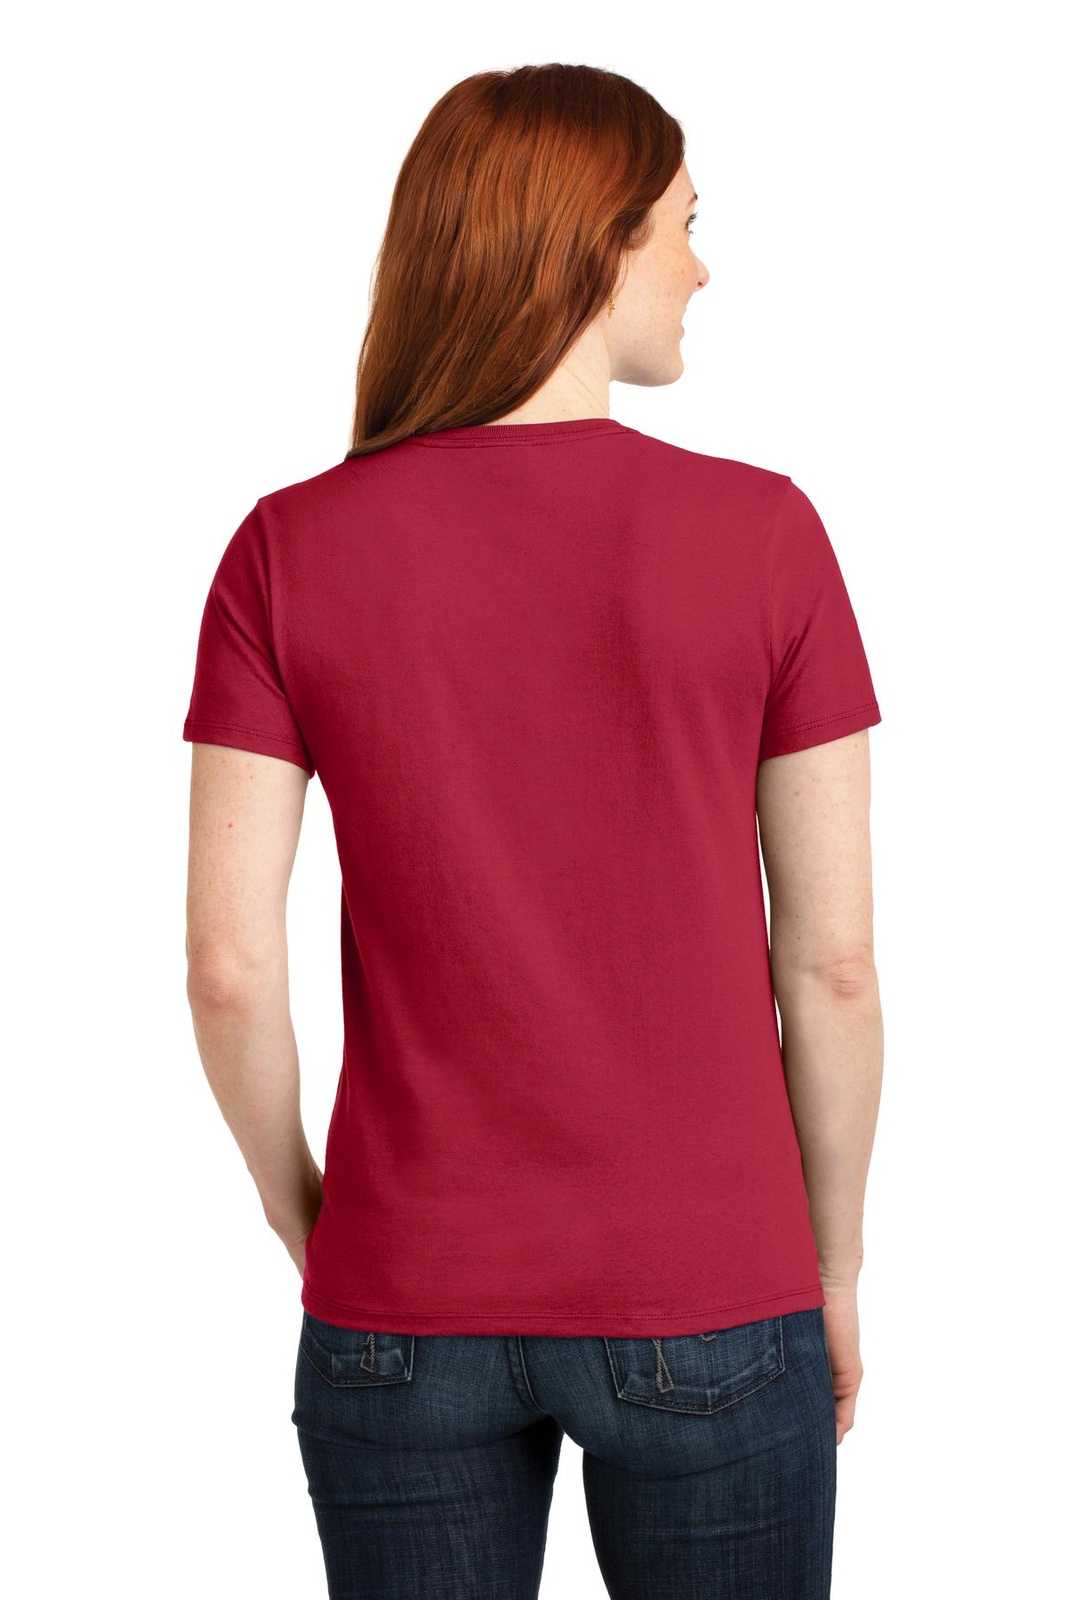 Port & Company LPC55 Ladies Core Blend Tee - Red - HIT a Double - 1